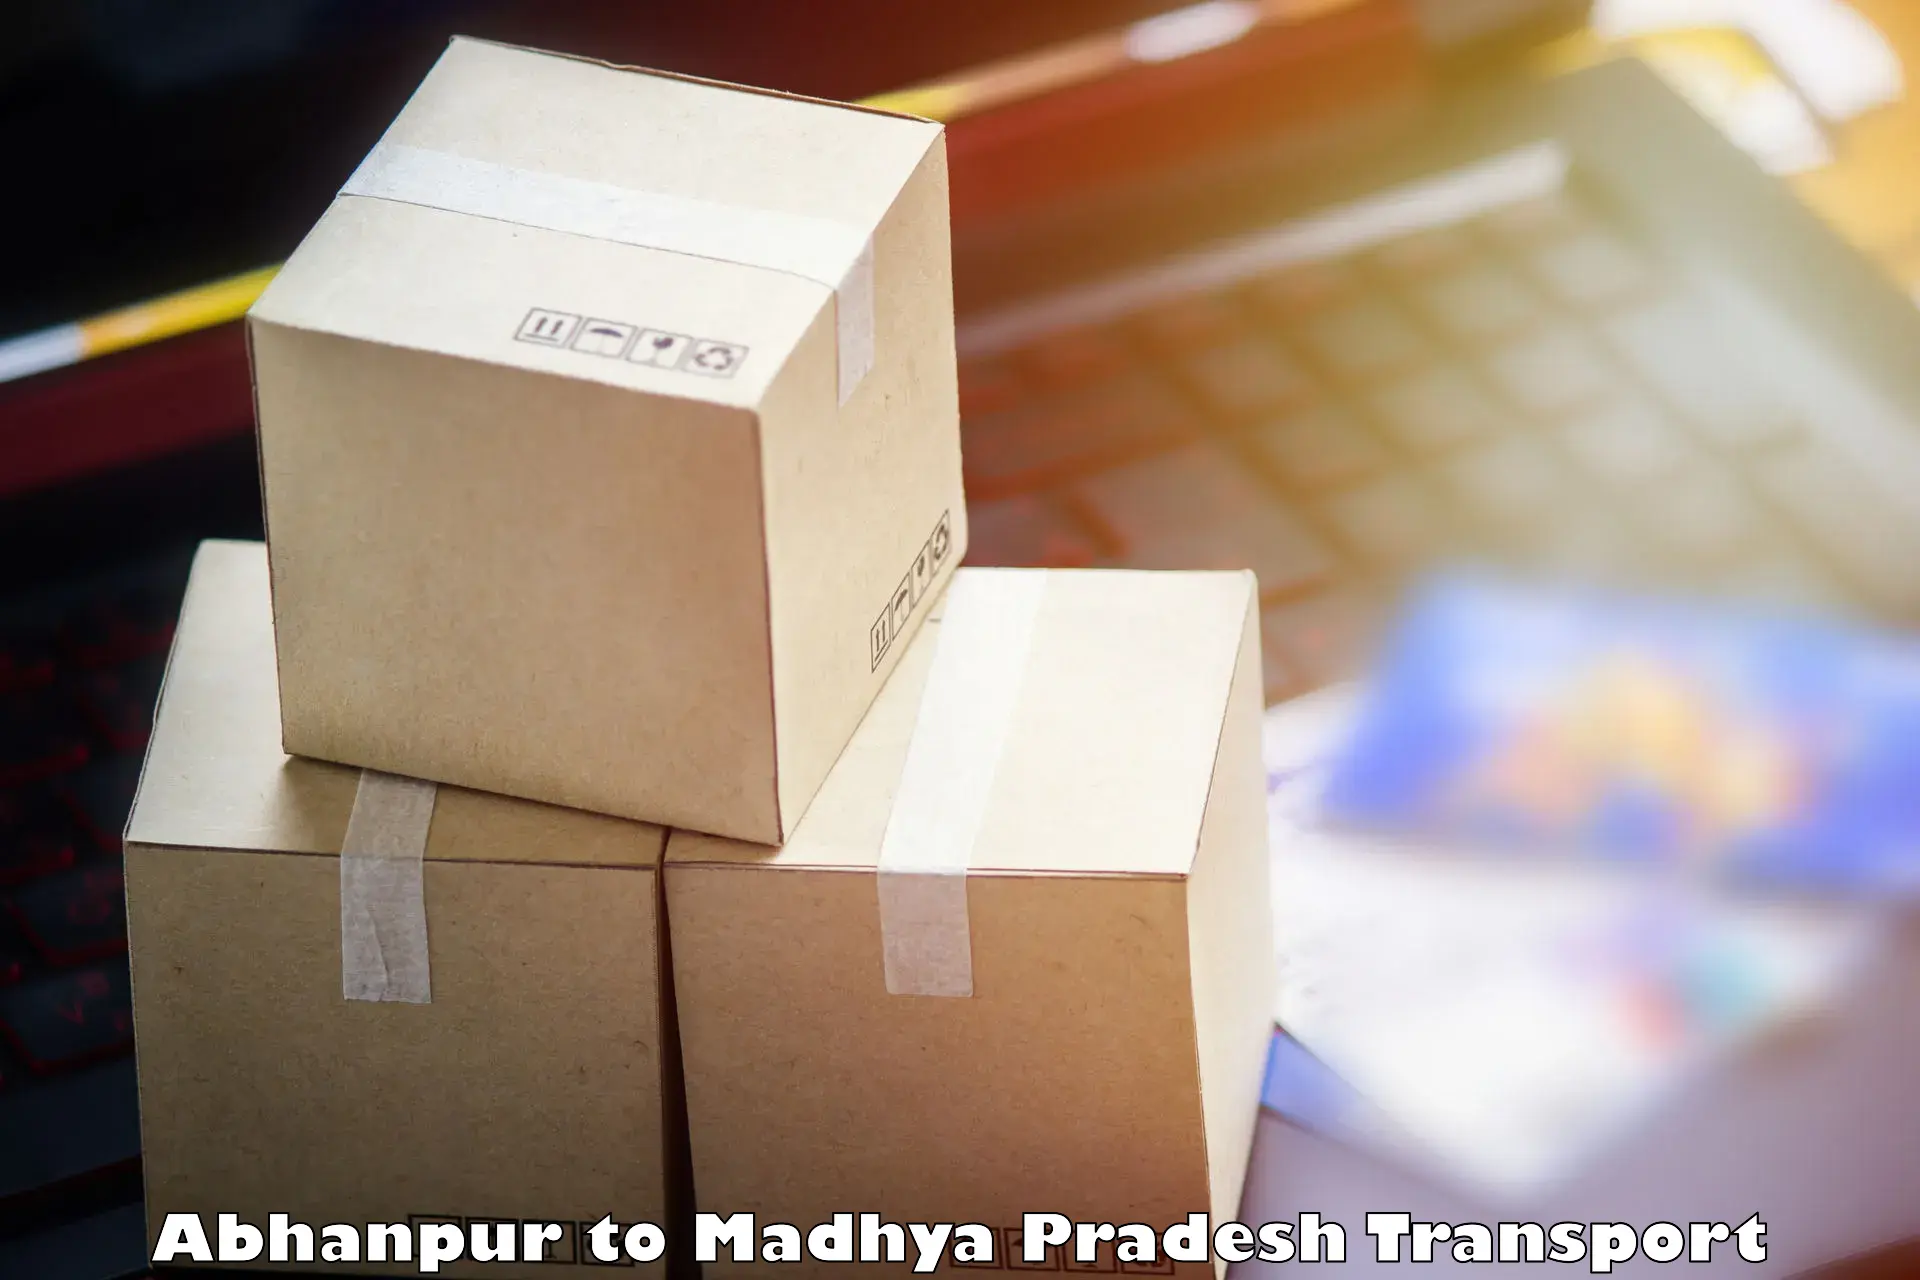 Parcel transport services Abhanpur to Bhanpura